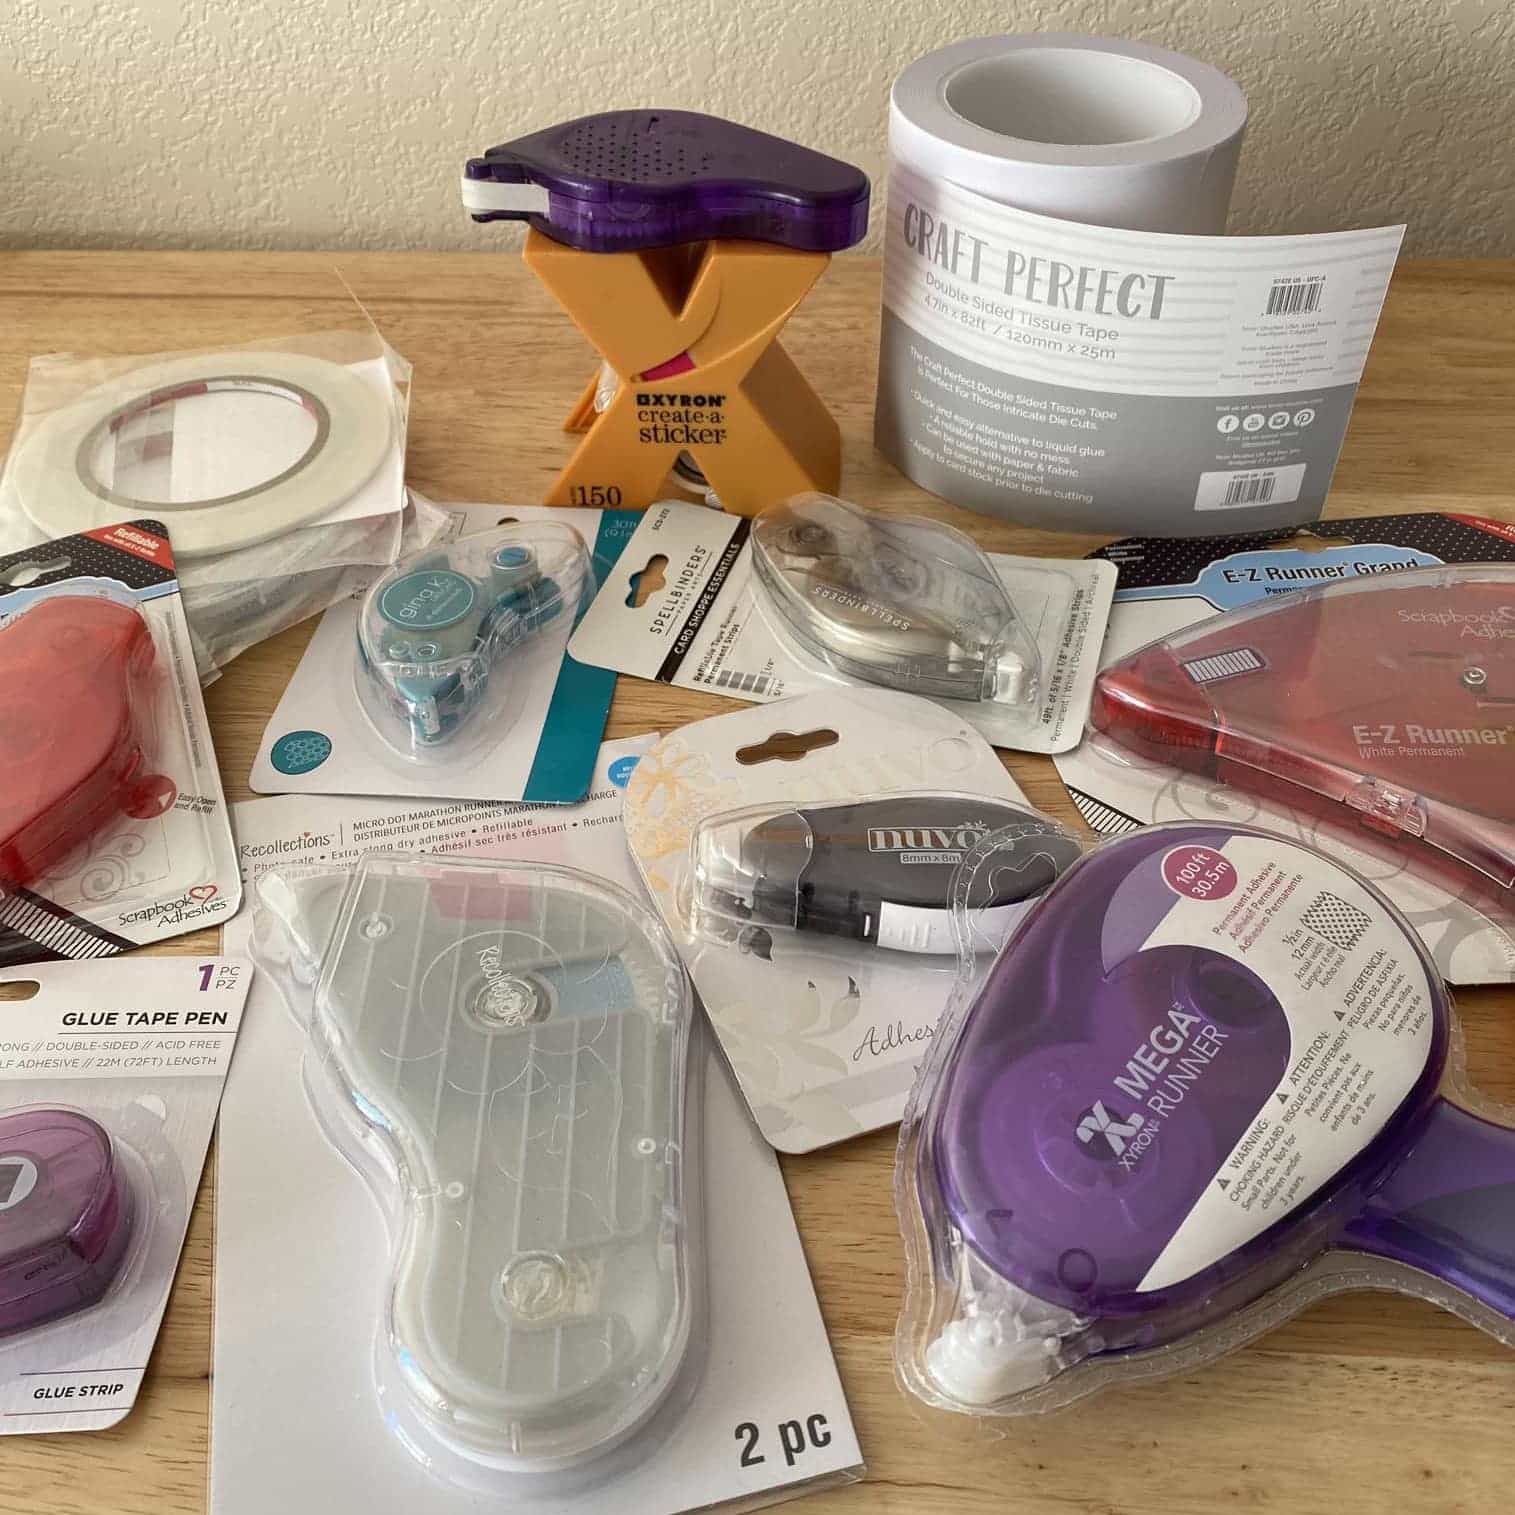 Tape Runner Adhesive Dispenser Review: Which is Best for Paper Crafting